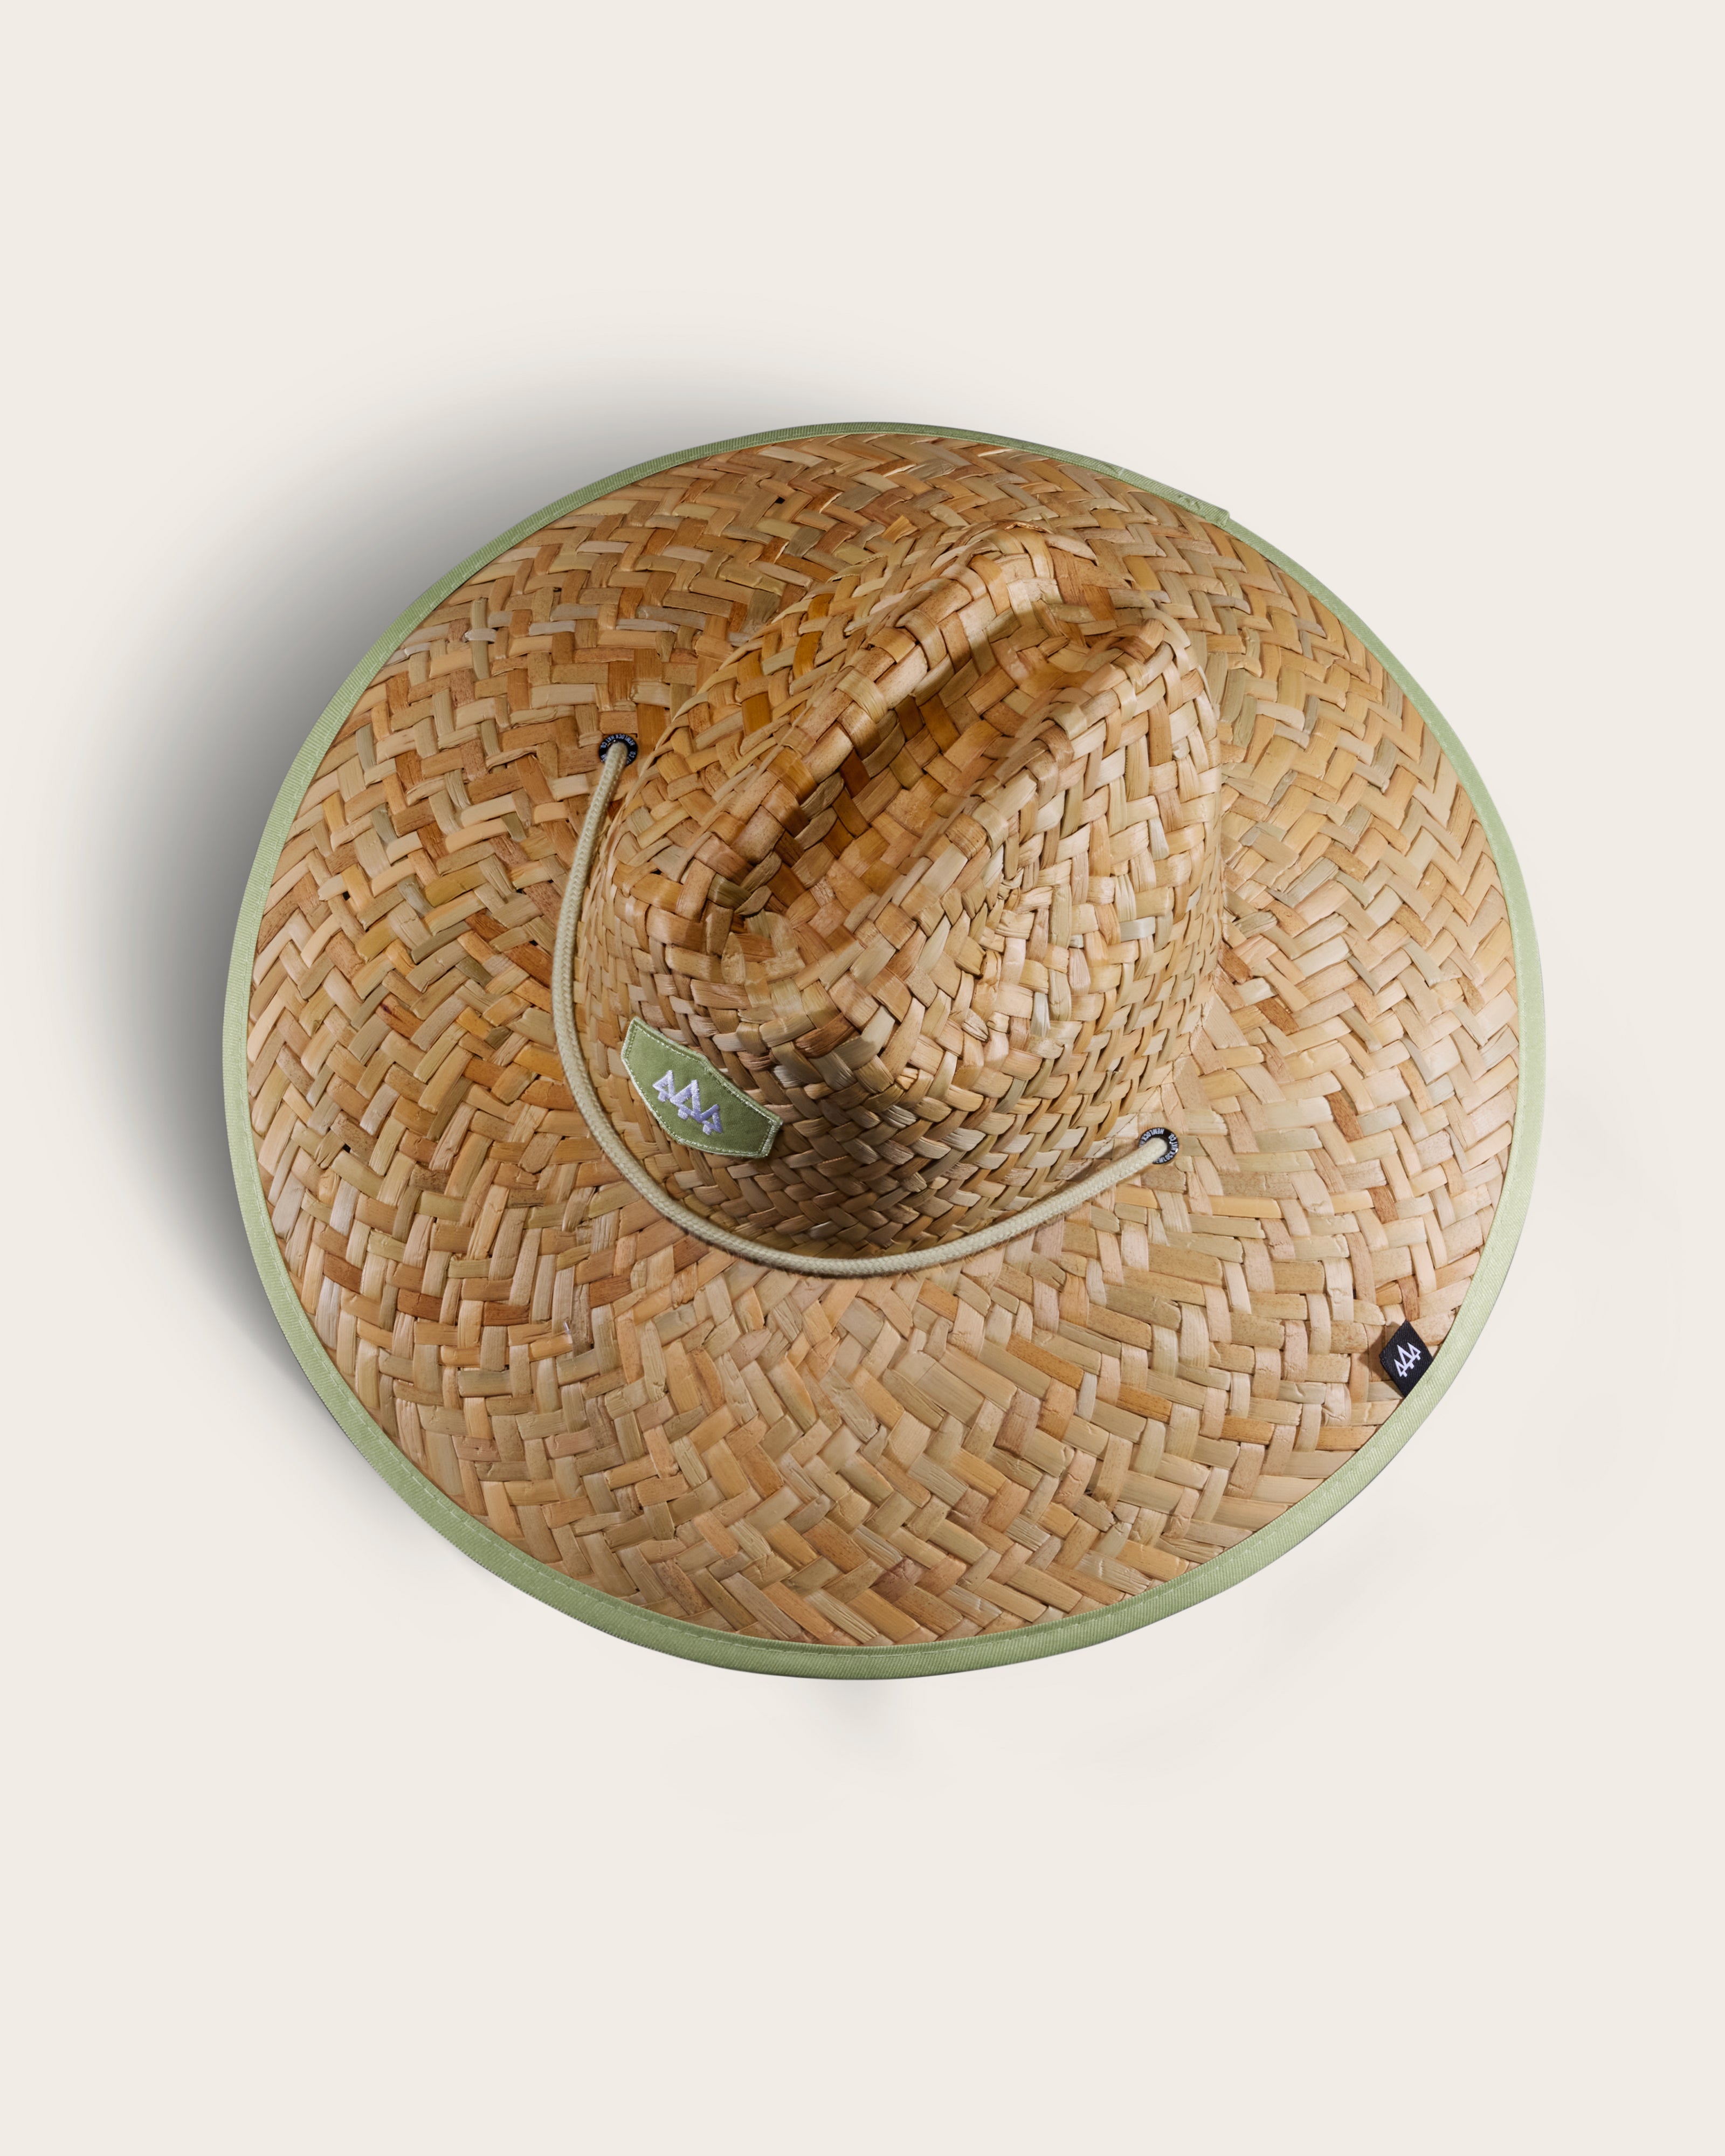 Hemlock Pistachio straw lifeguard hat with green color top of hat